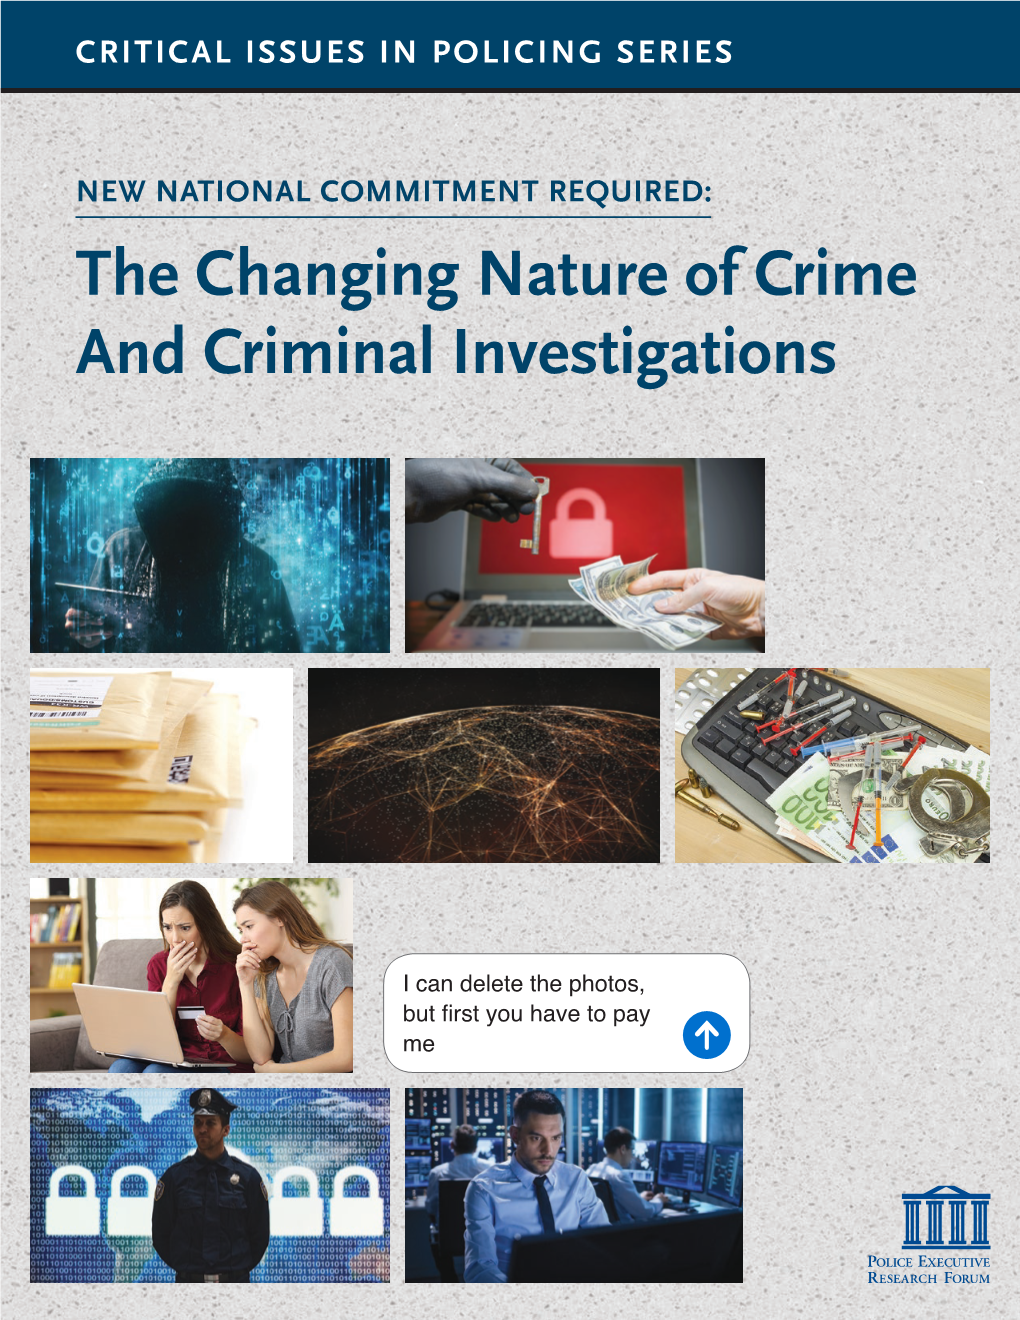 The Changing Nature of Crime and Criminal Investigations